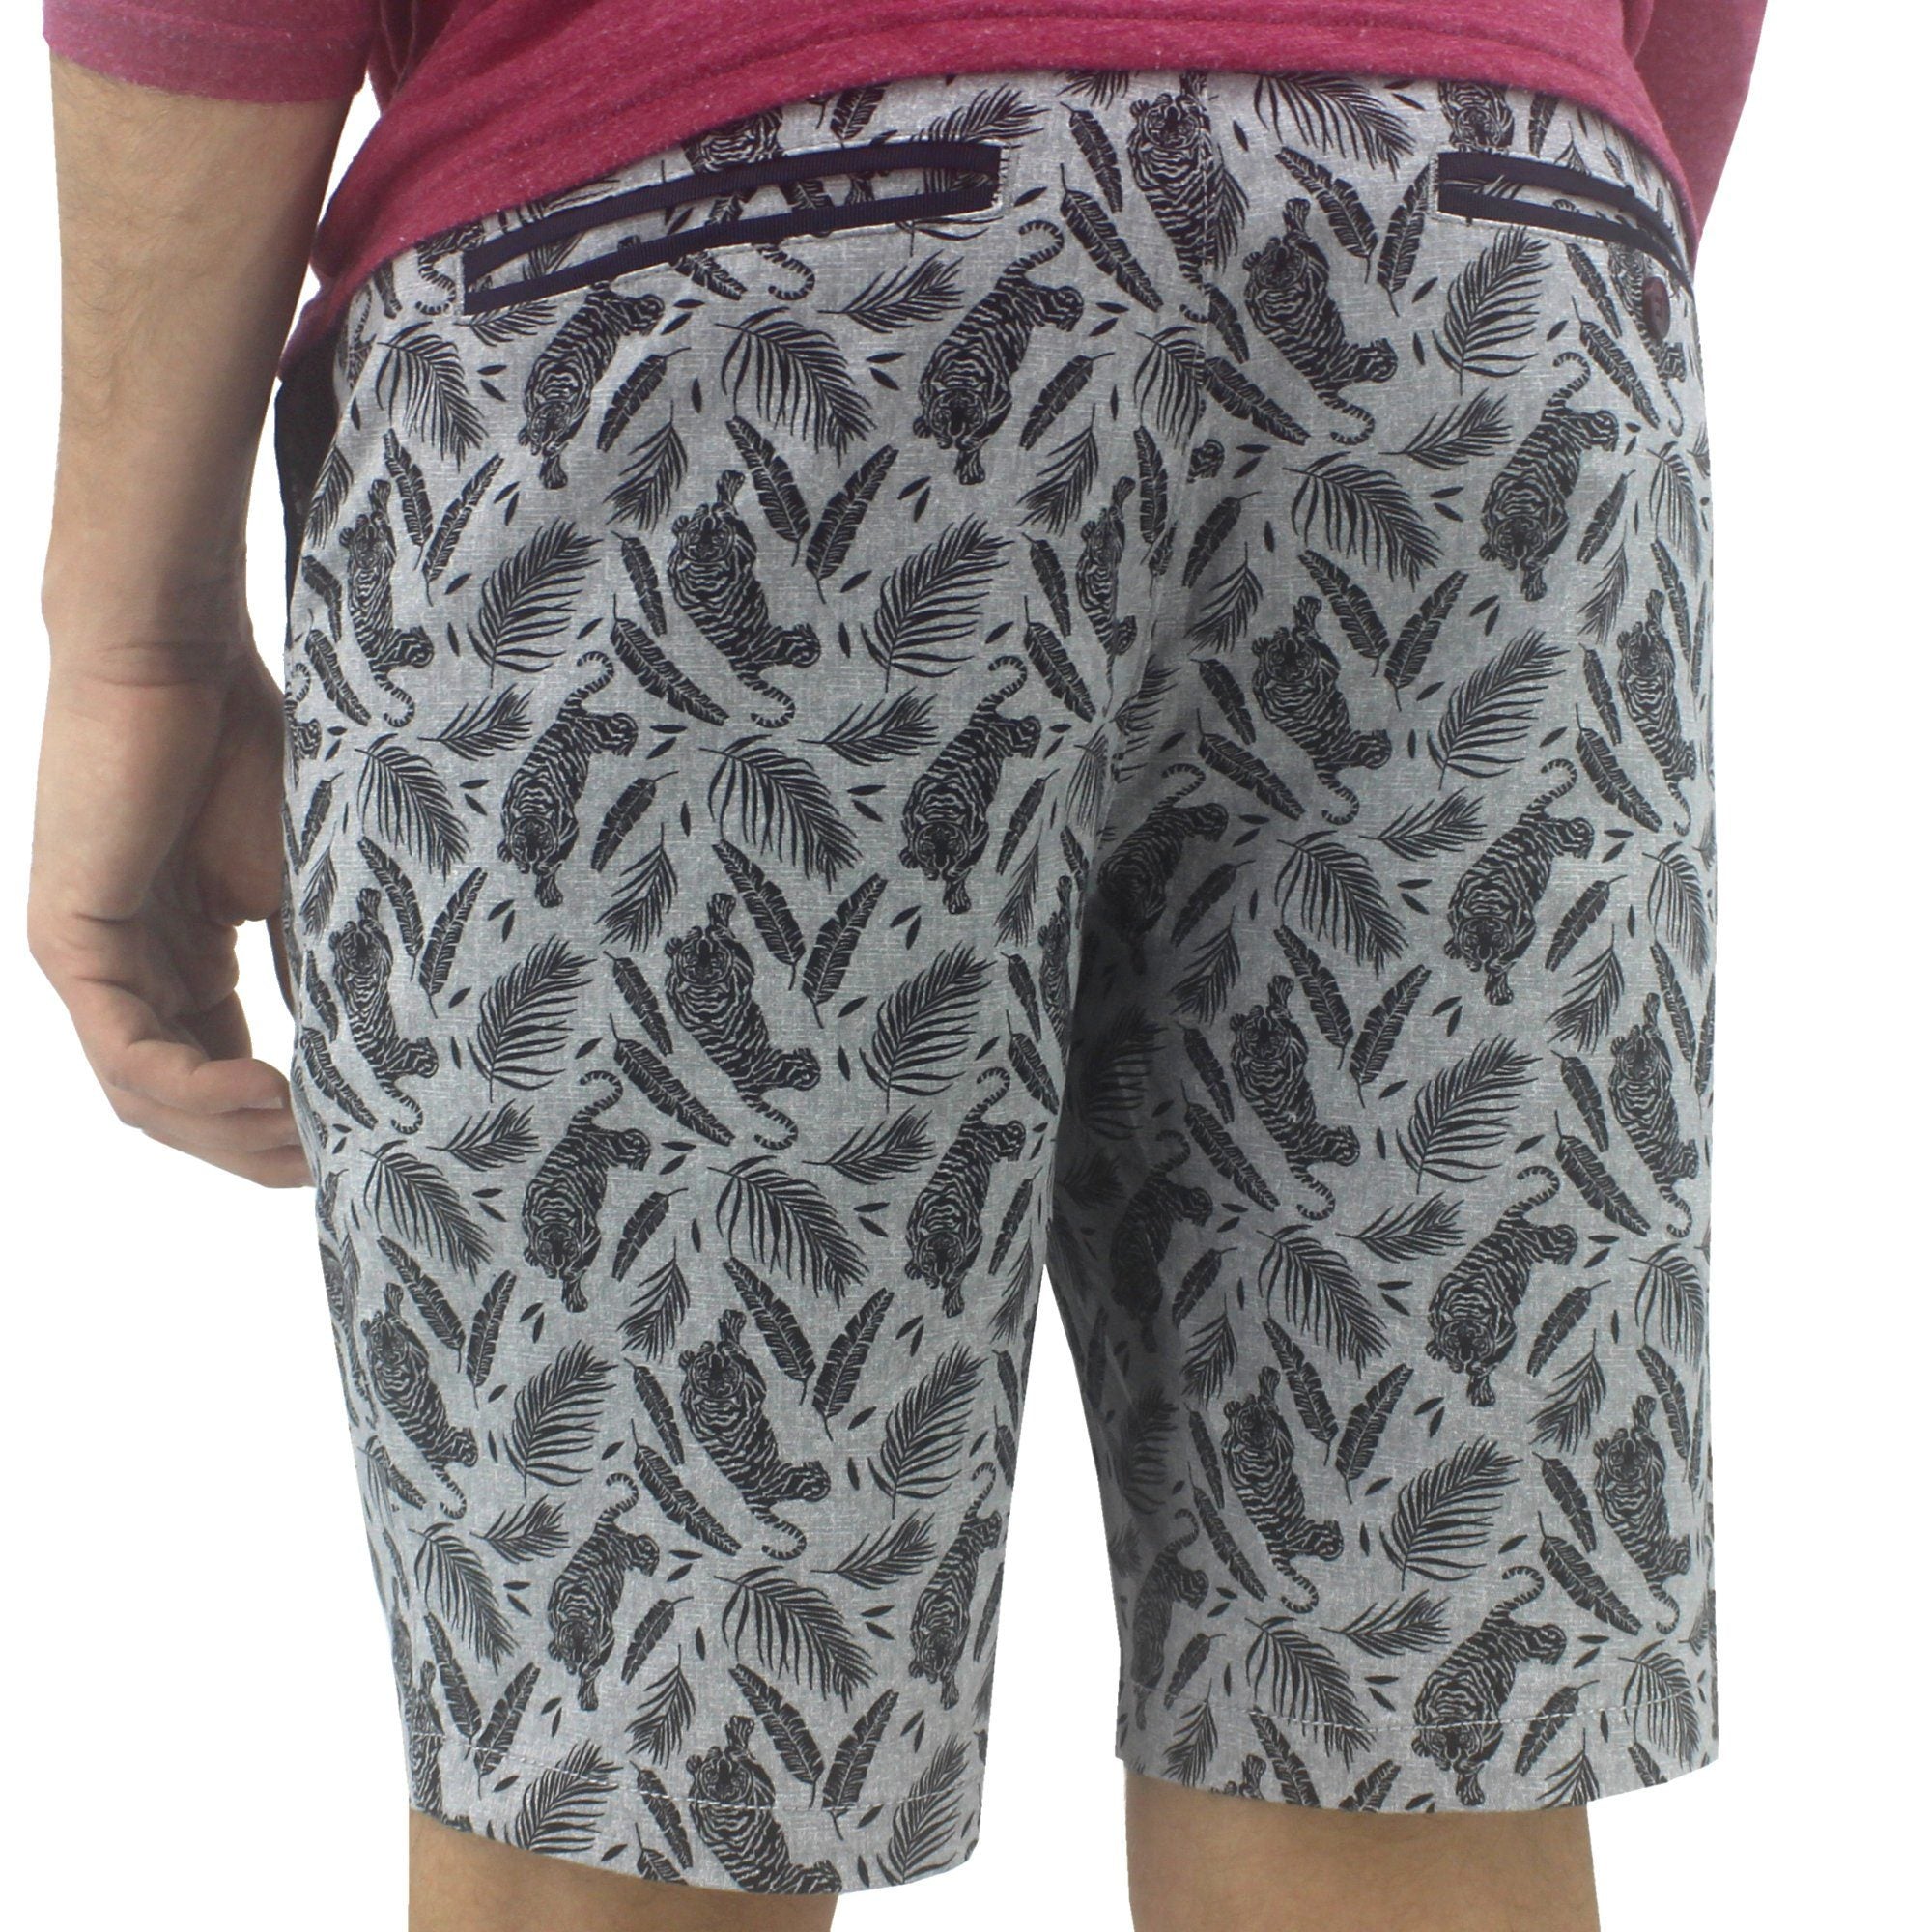 Light Grey Bermuda Shorts. Chino Shorts for Men with Tiger All Over Print